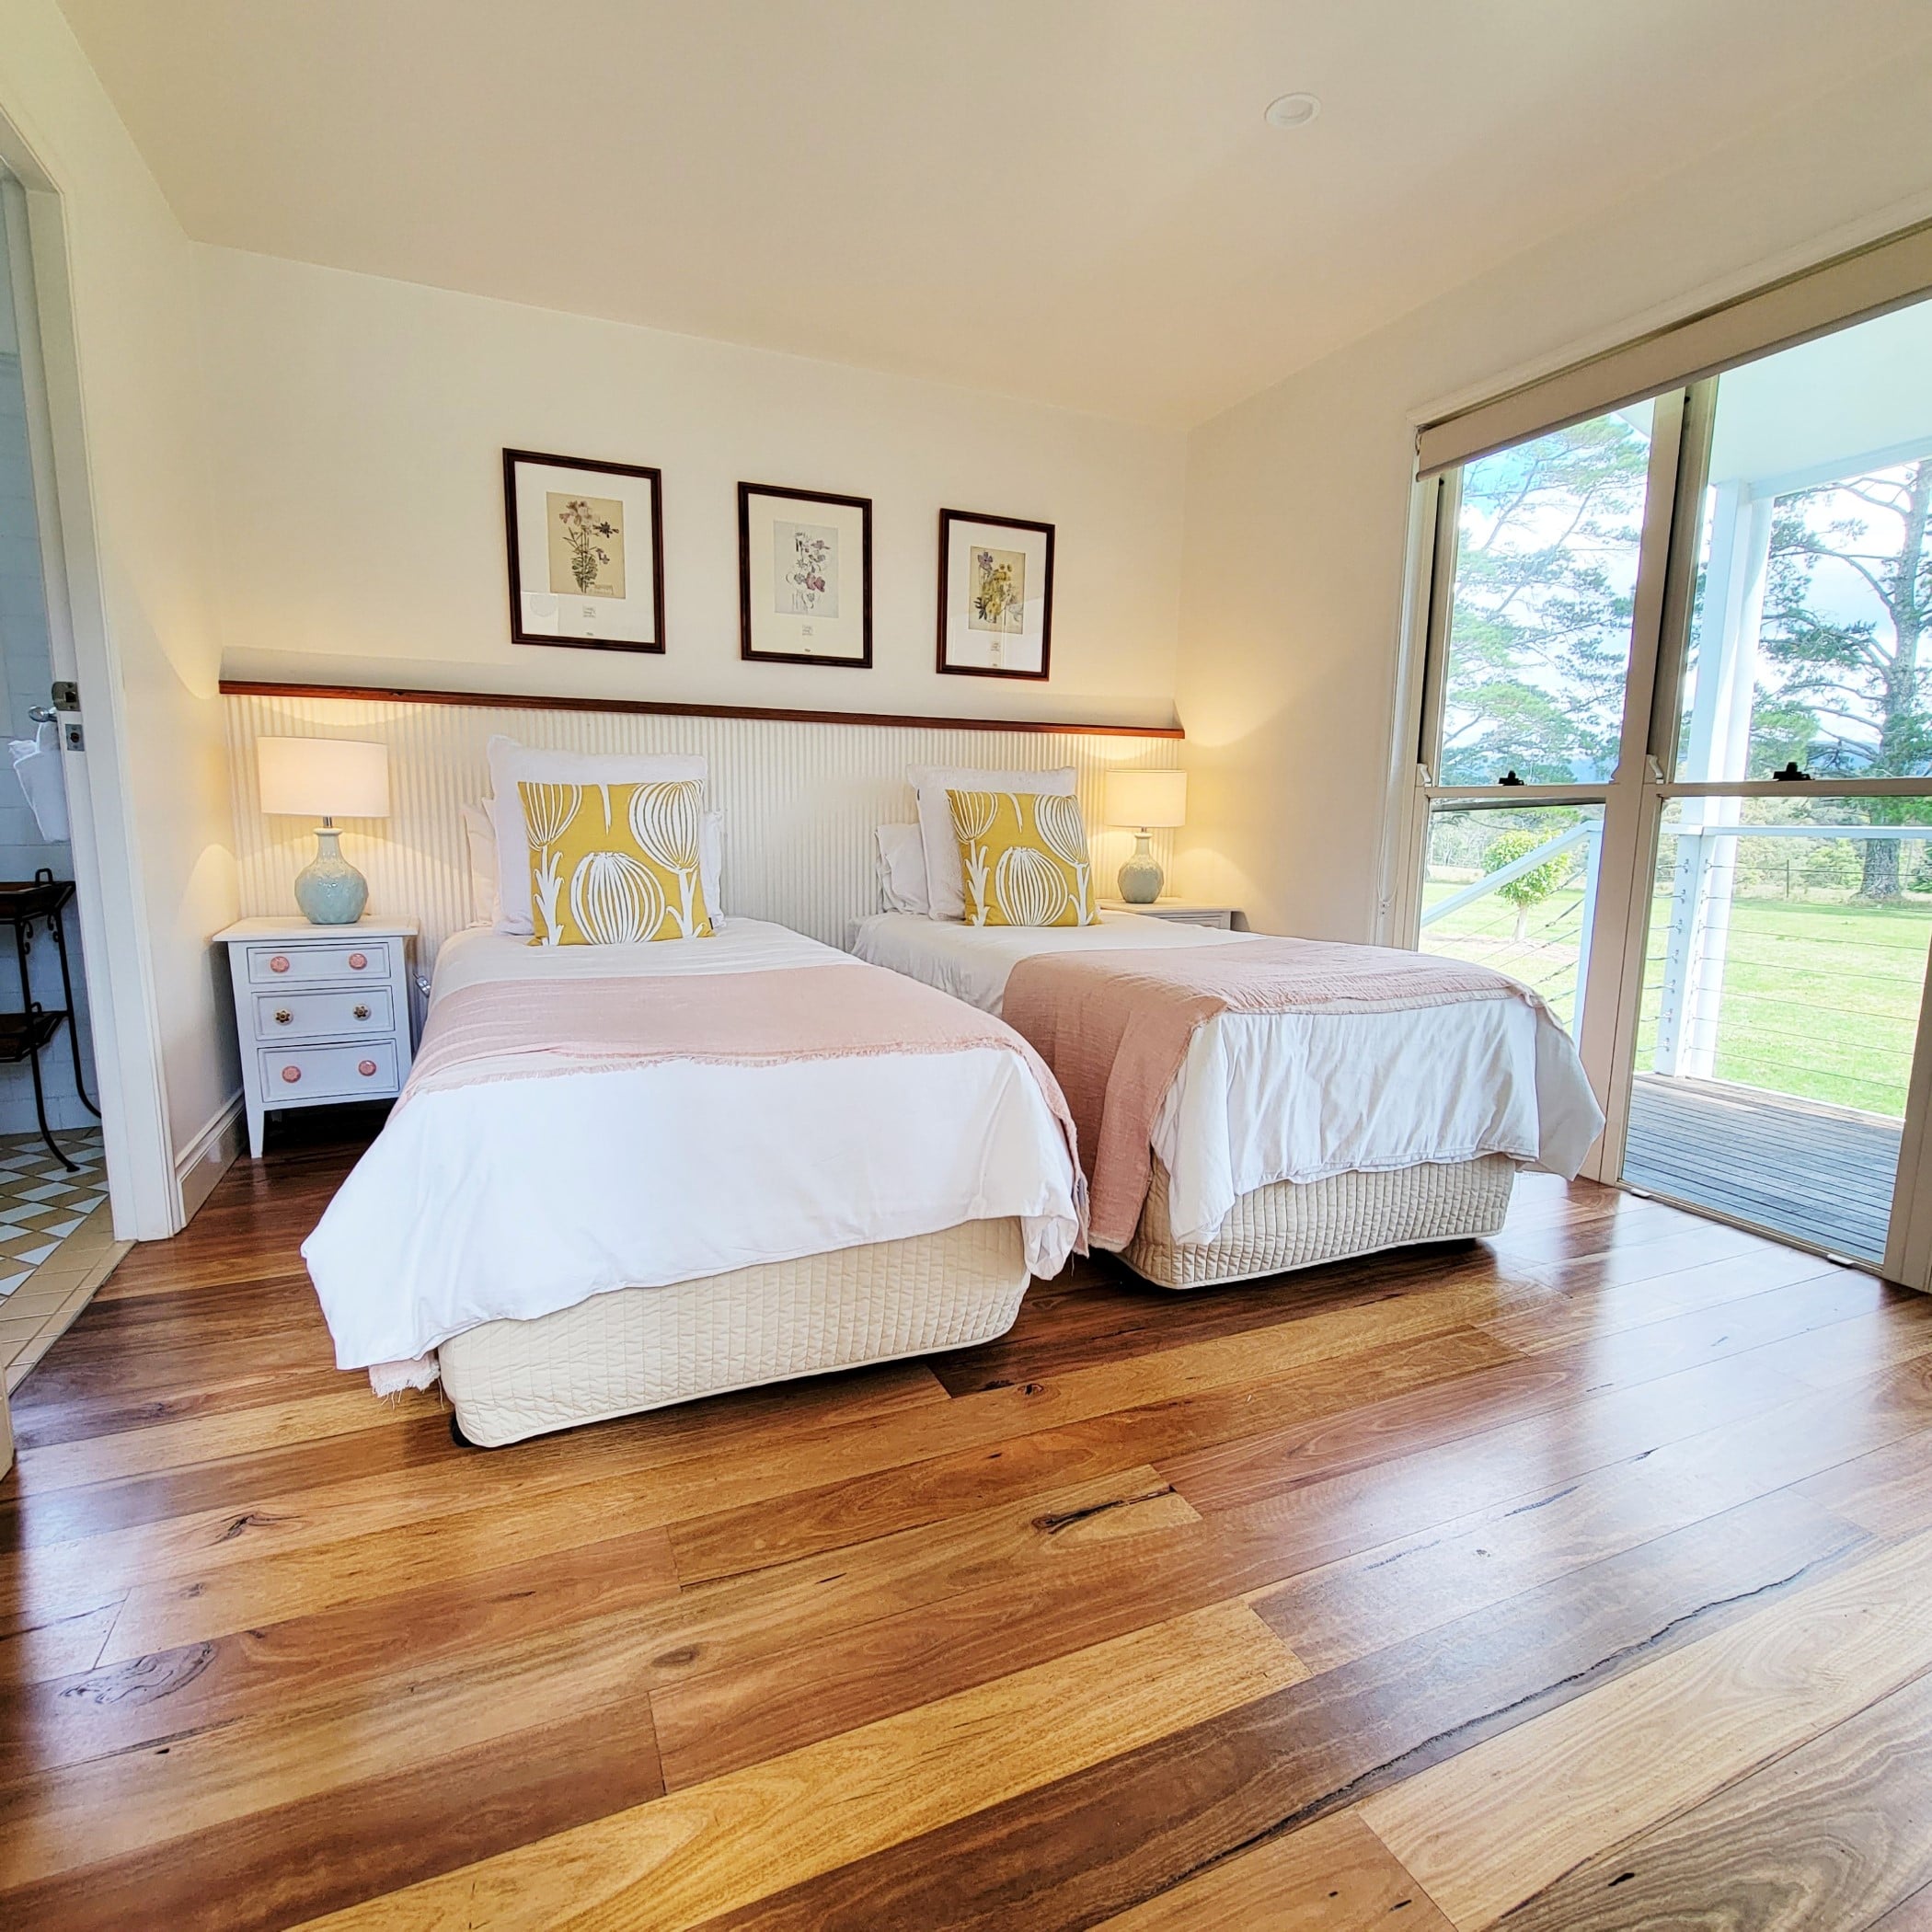 Wattamolla Lodge - downstairs bedroom (bed can be 2 singles or 1 king double)